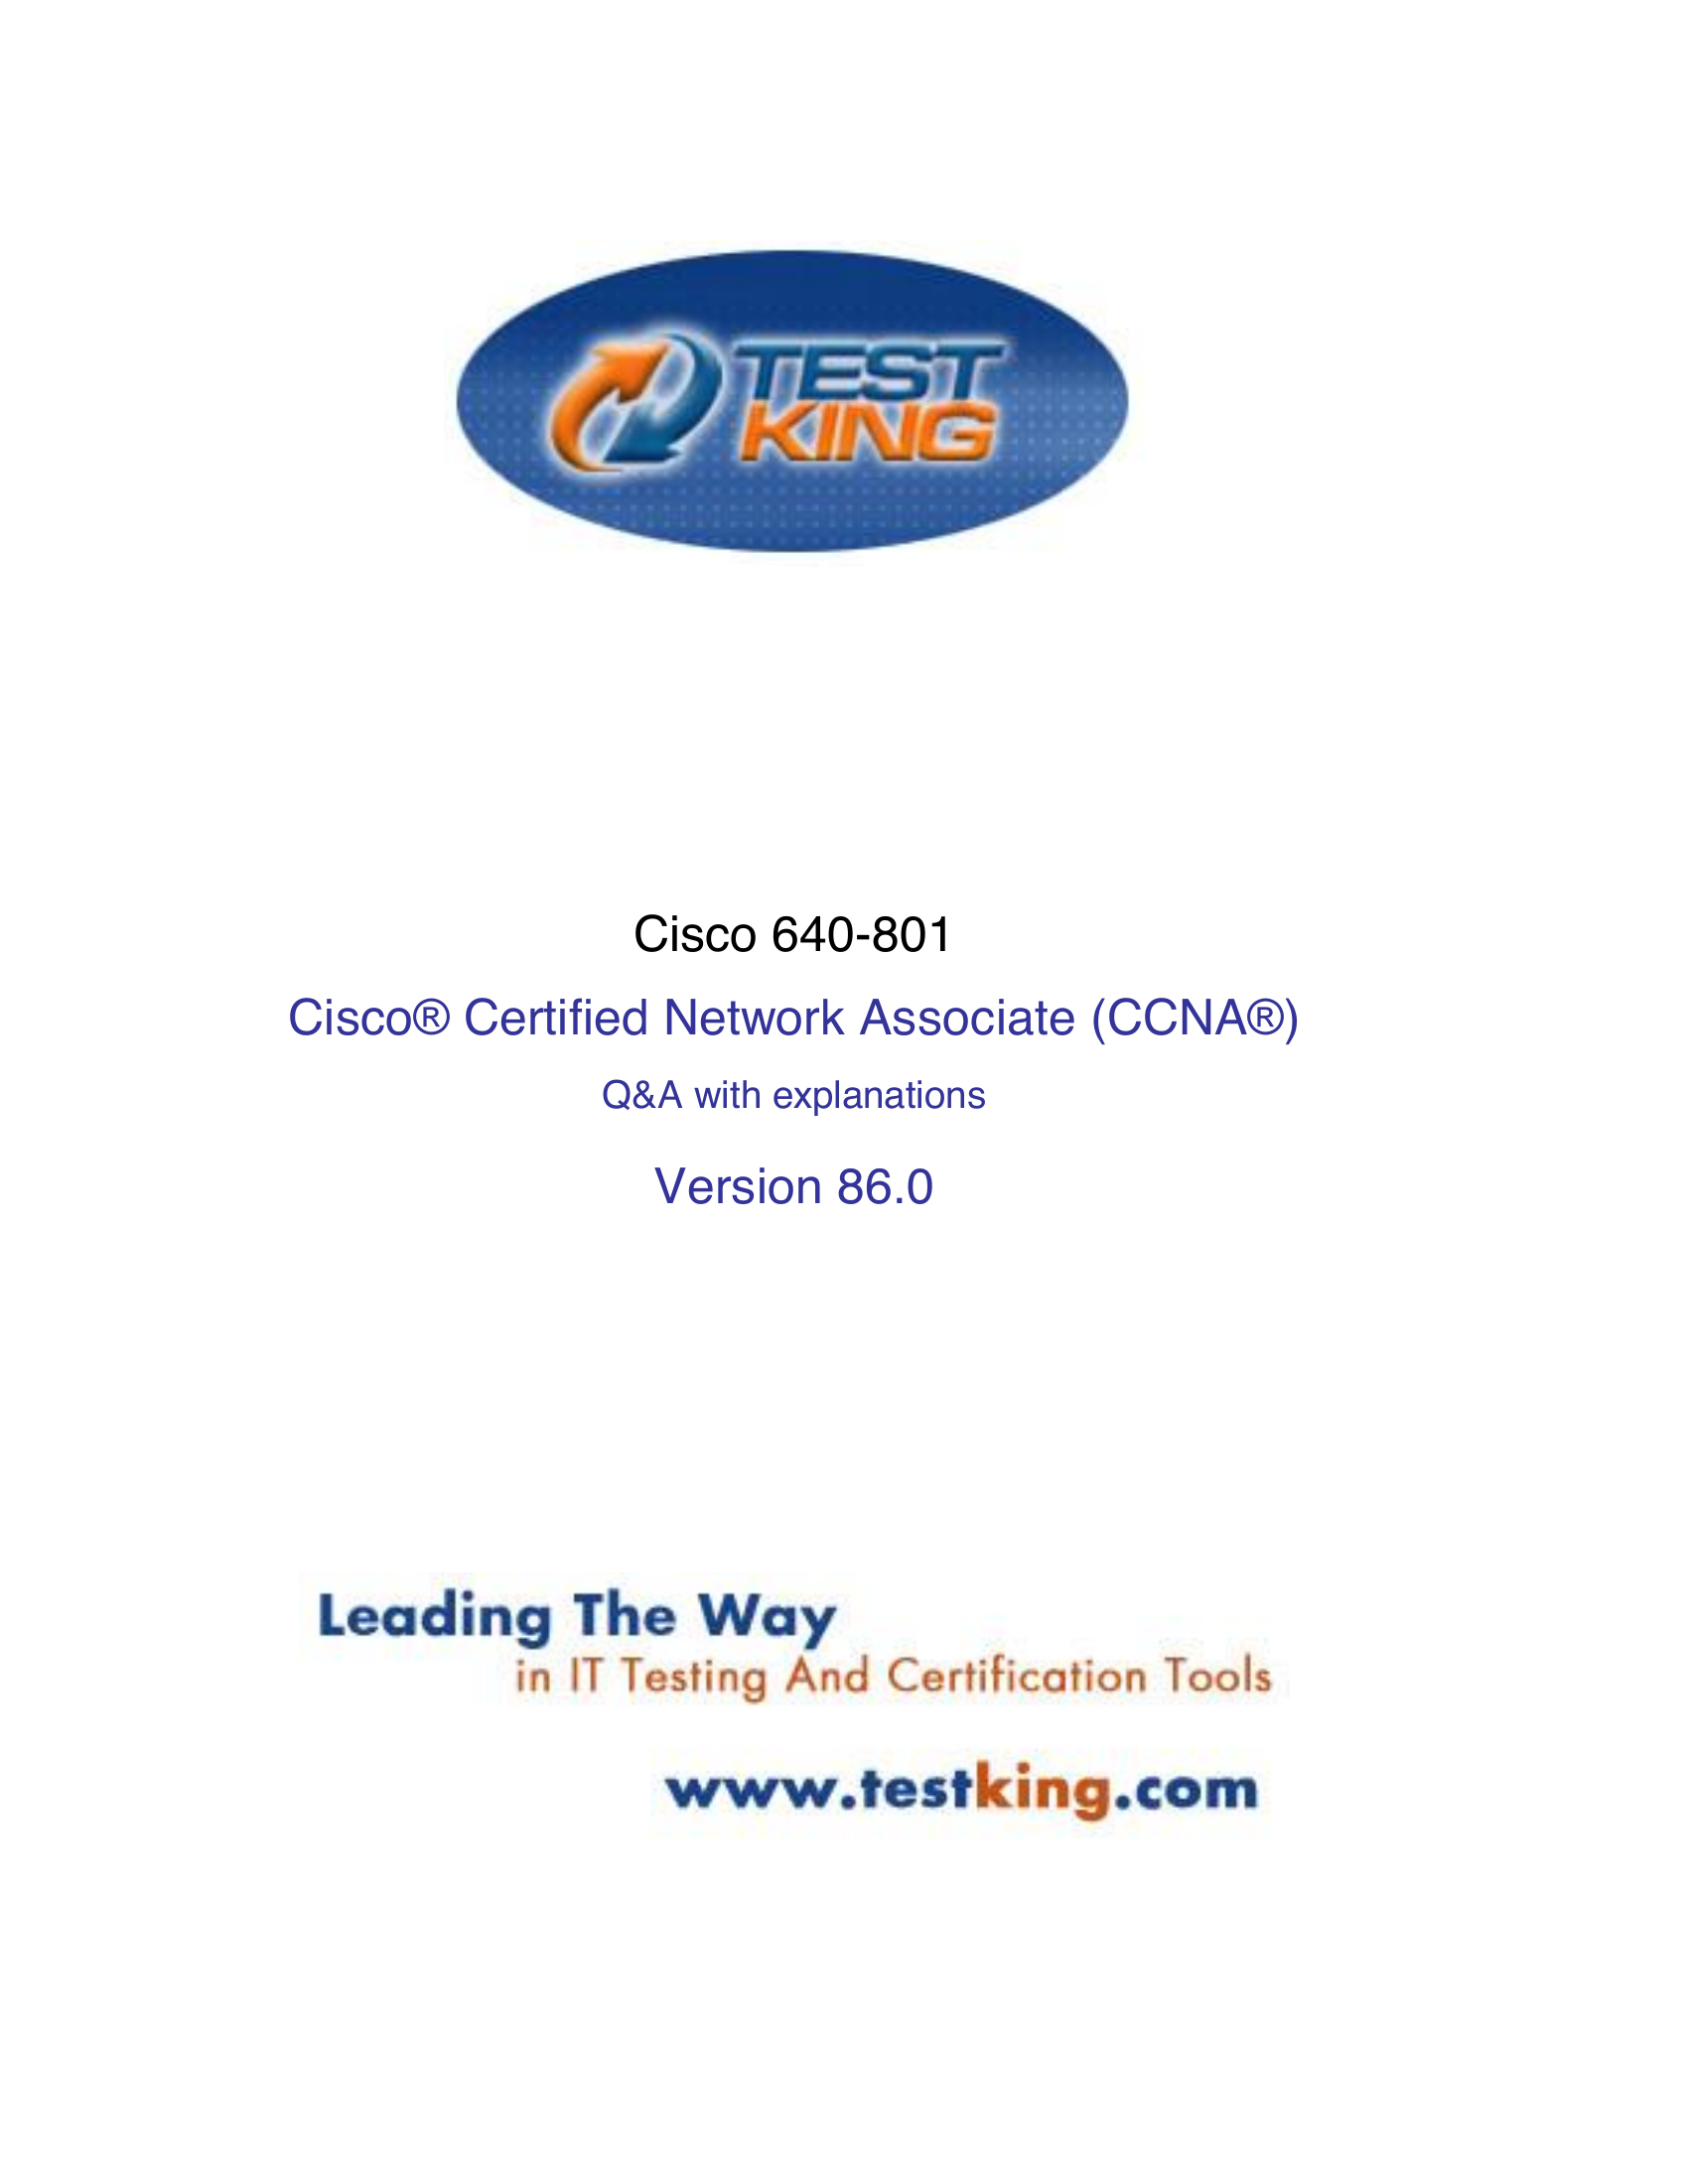 Ccna. Questions And Answers With Explanations Graded A+